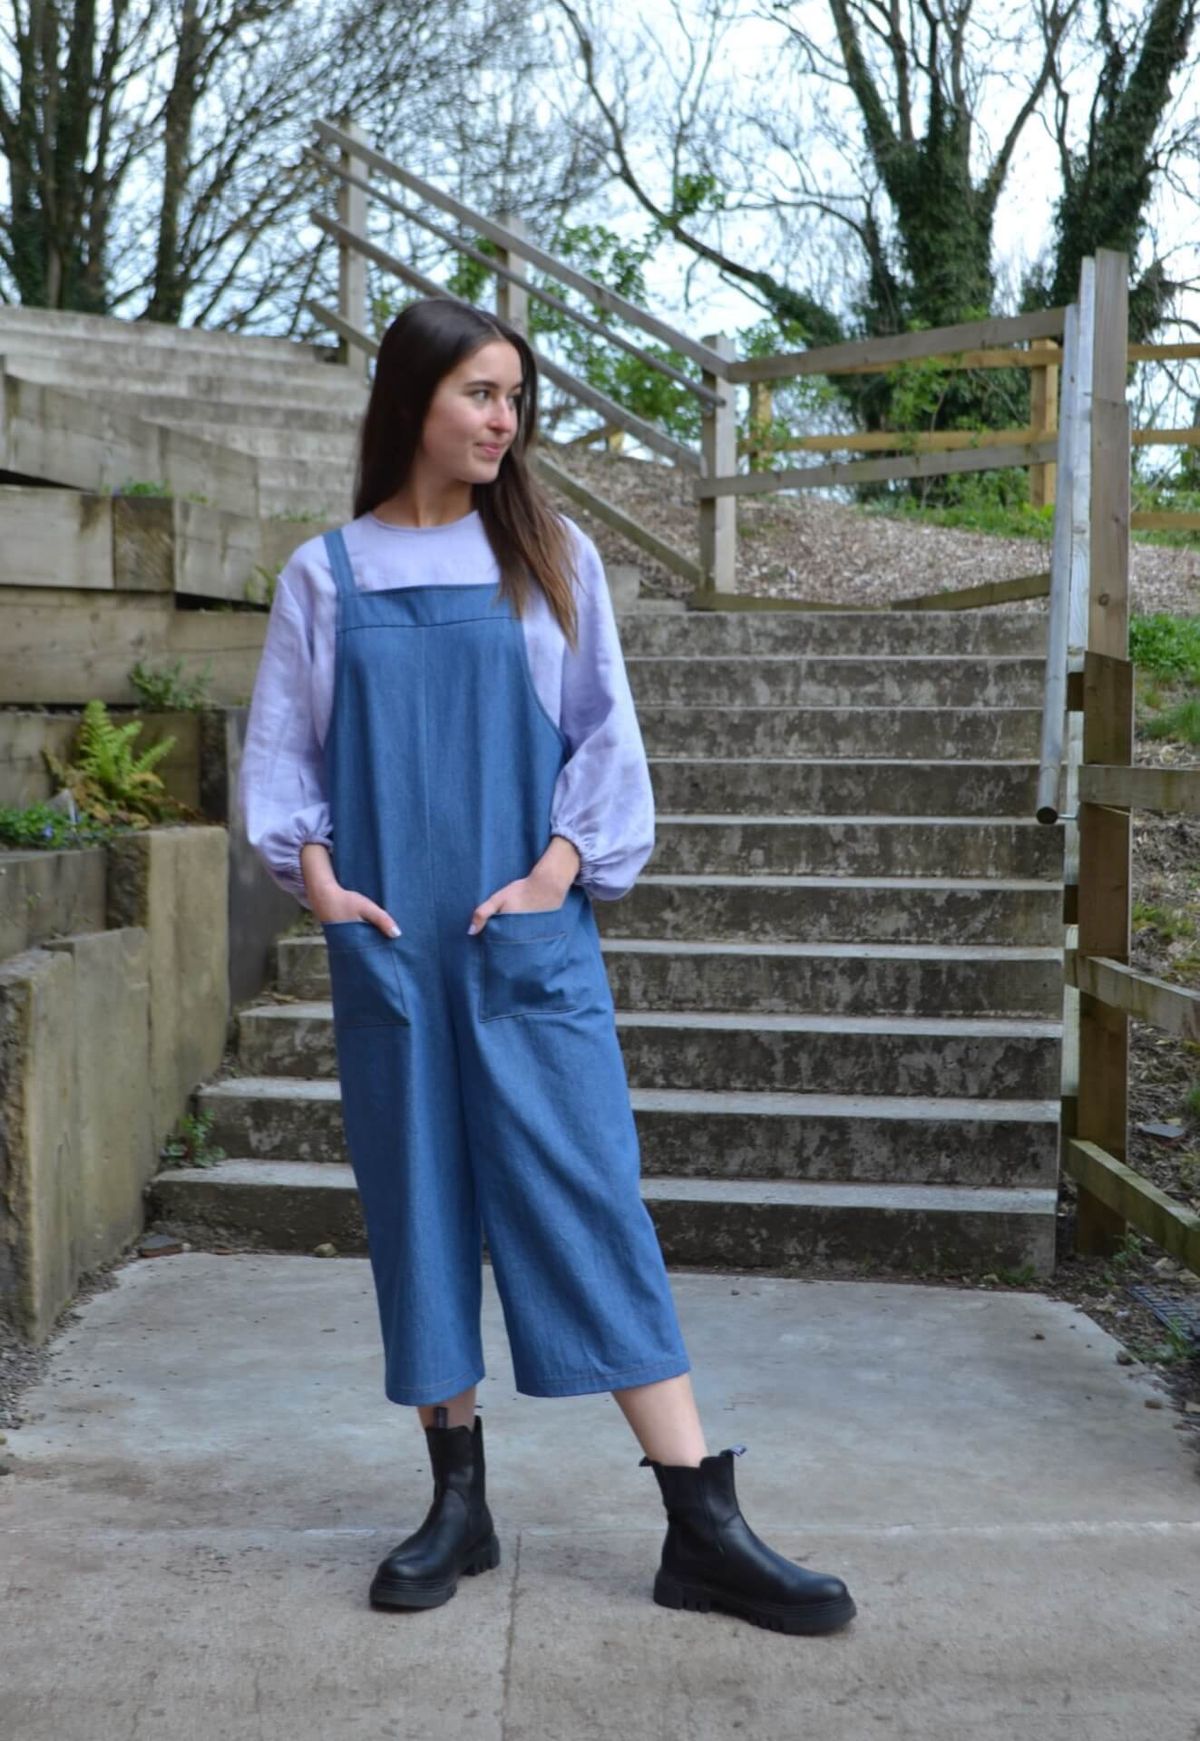 Dungarees in a Day 